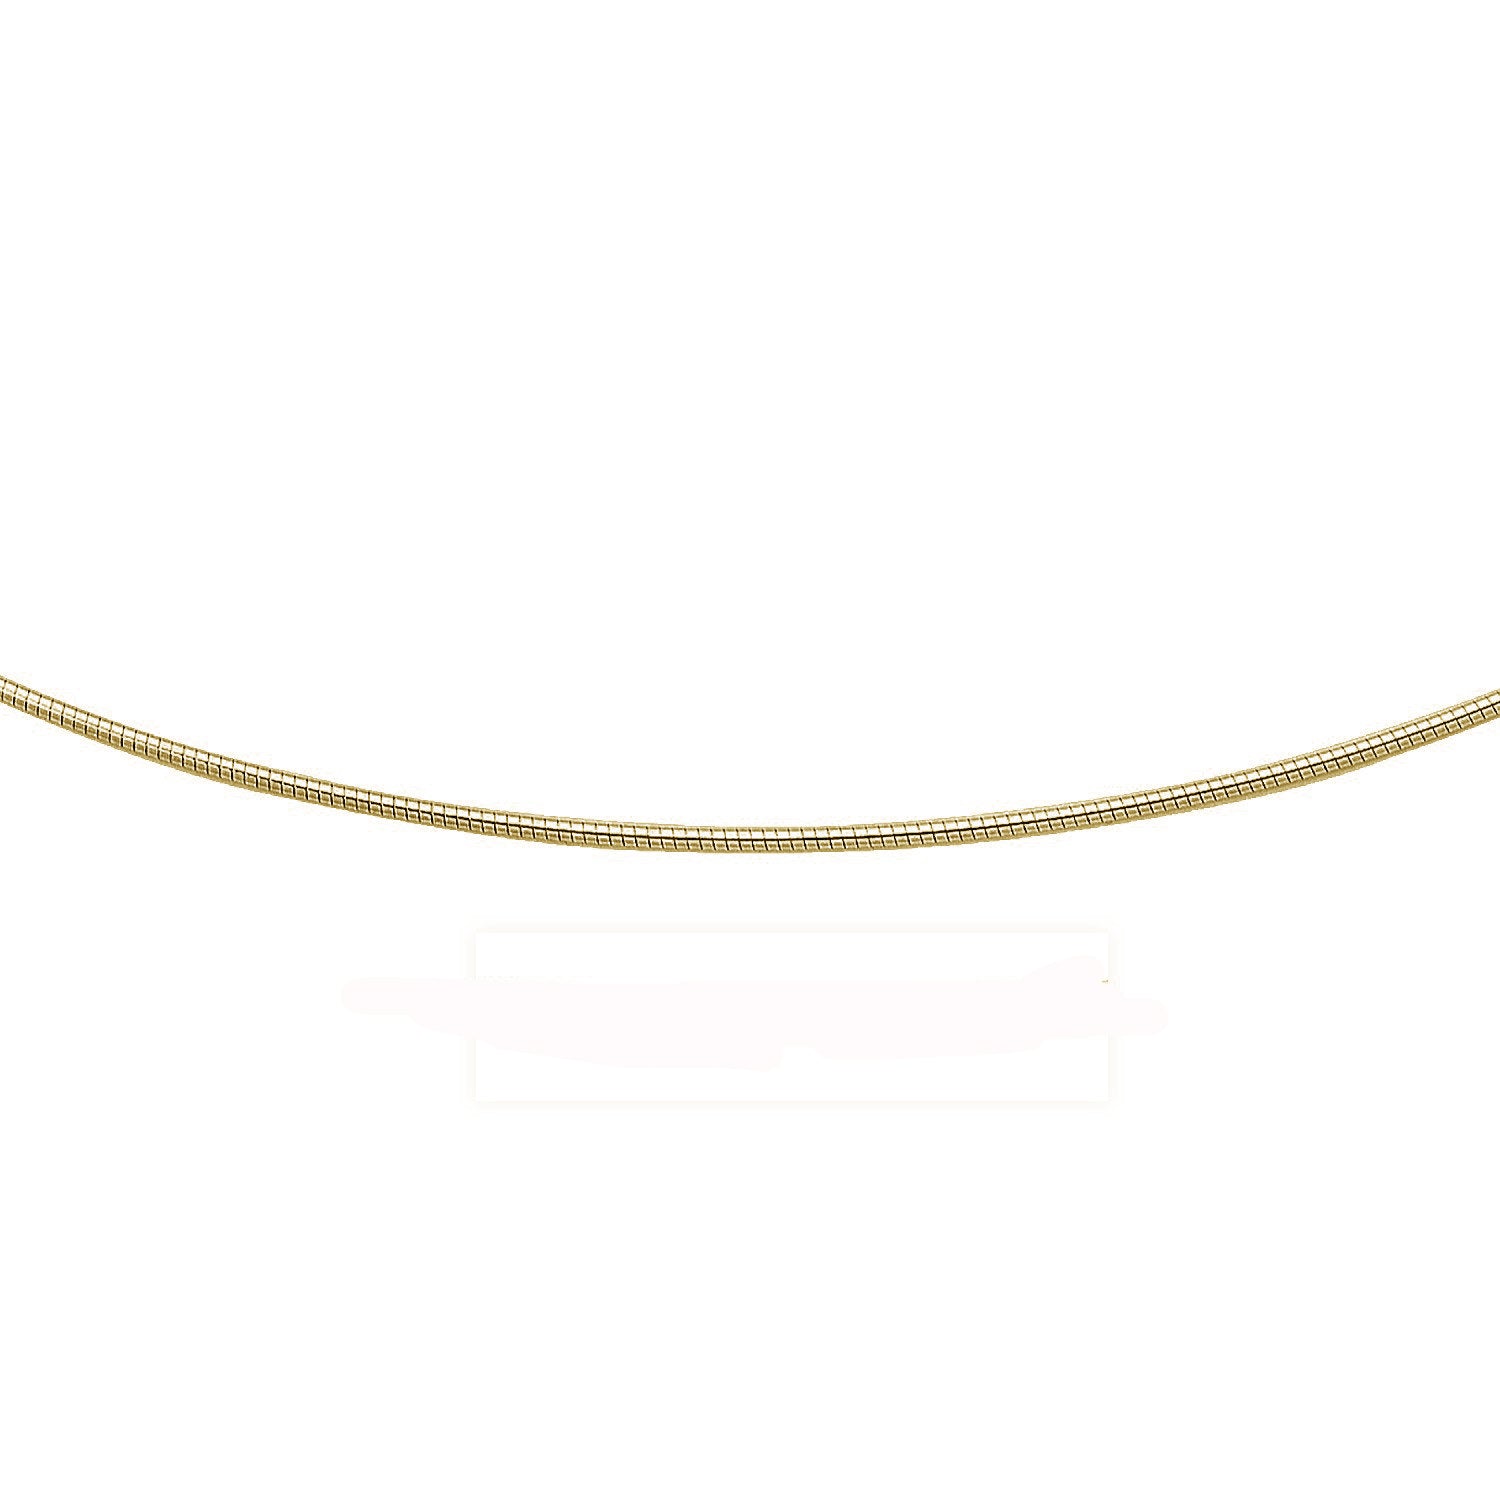 ''1MM Yellow GOLD Plated .925 Sterling Silver Round Omega Necklace Chain 16-18''''''